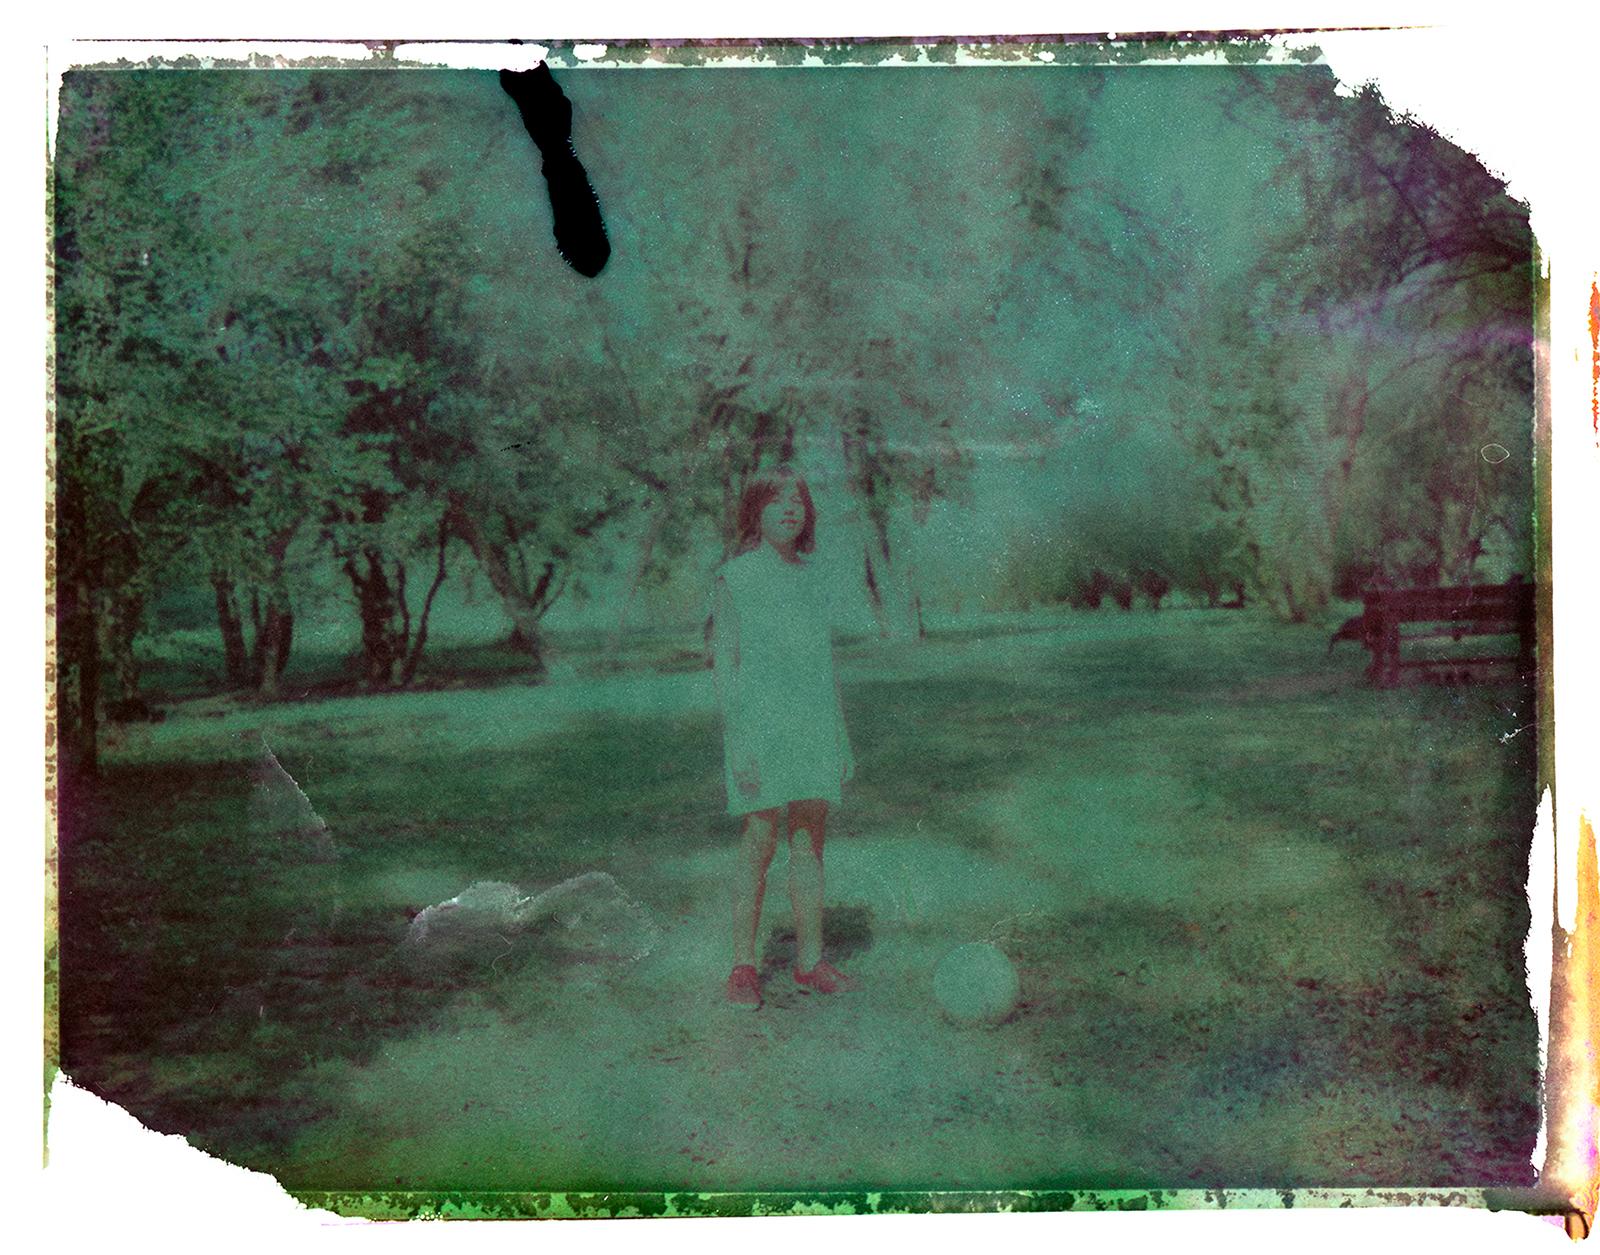 Boy with ball in the park - Contemporary, Polaroid, Childhood, abstract